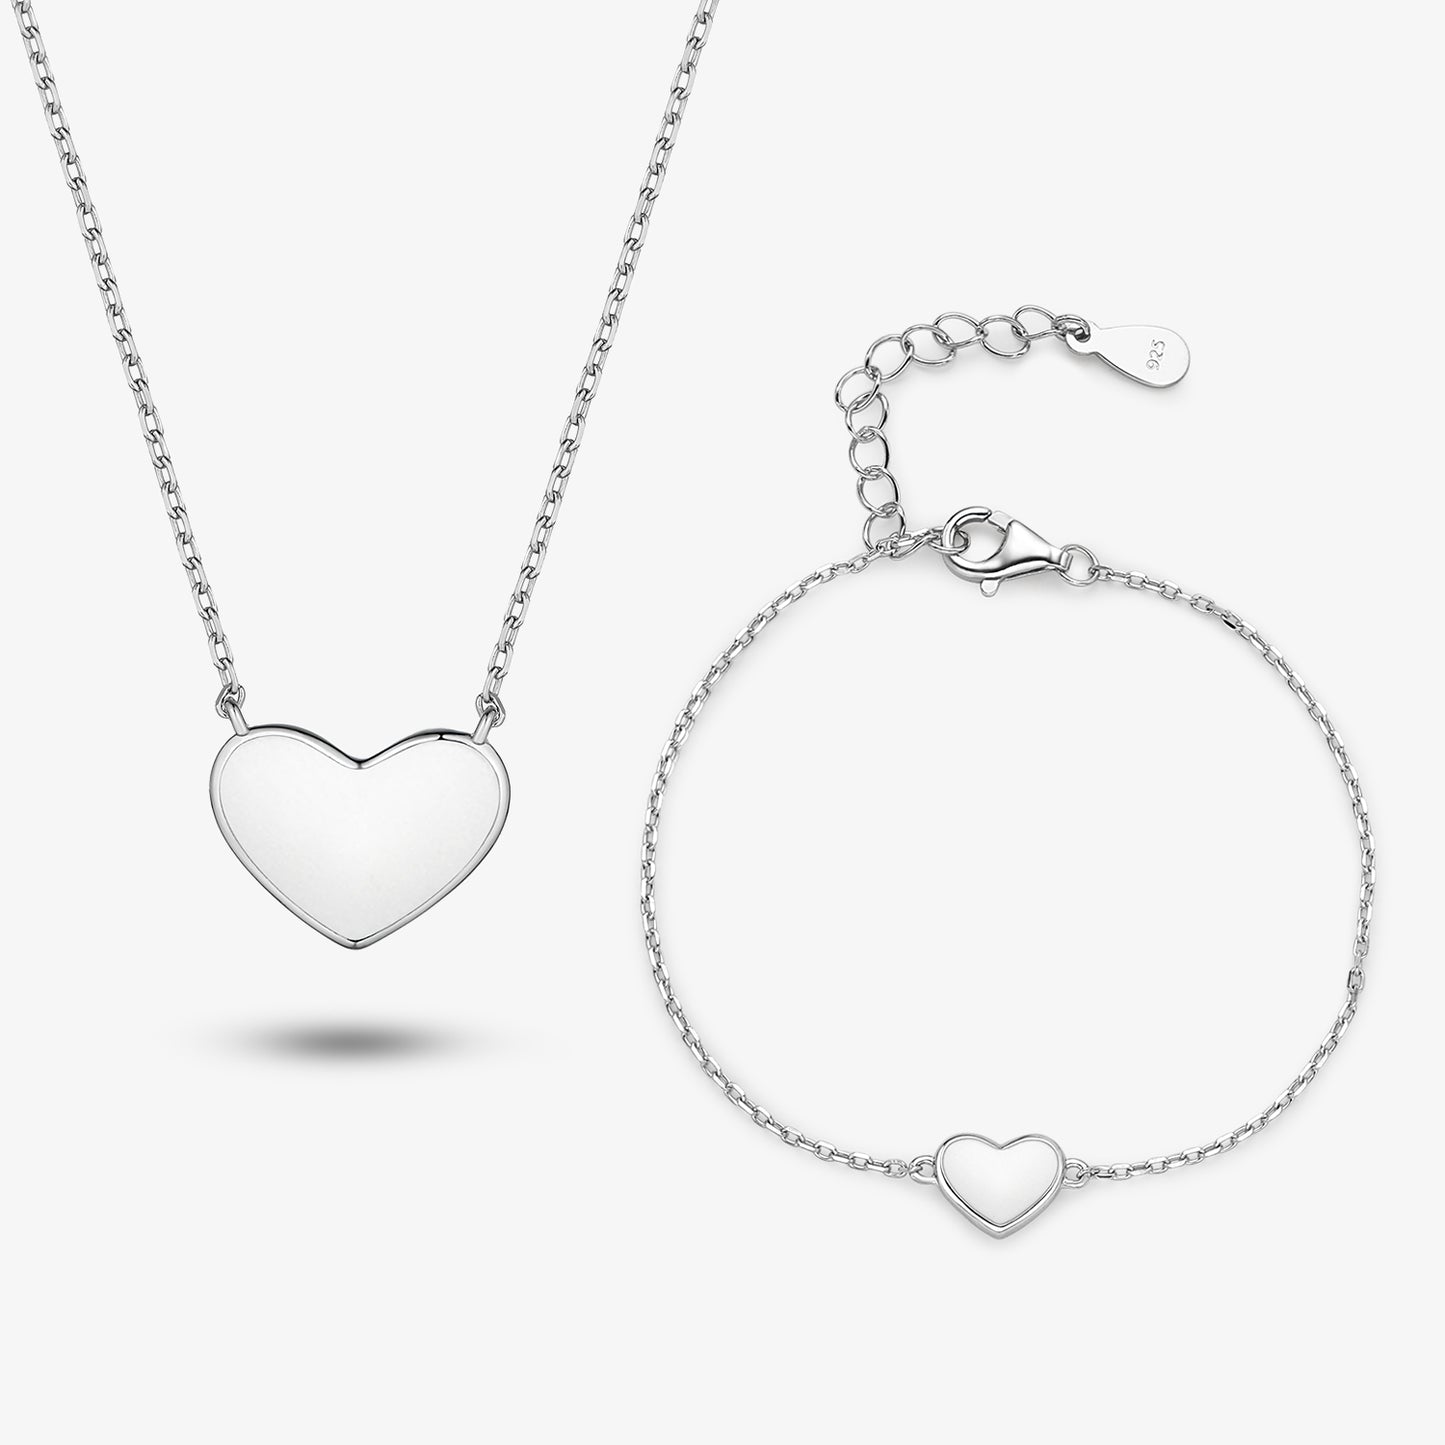 Solid Color Heart Shape Sterling Silver White Gold Plated Women's Bracelets Necklace Jewelry Set